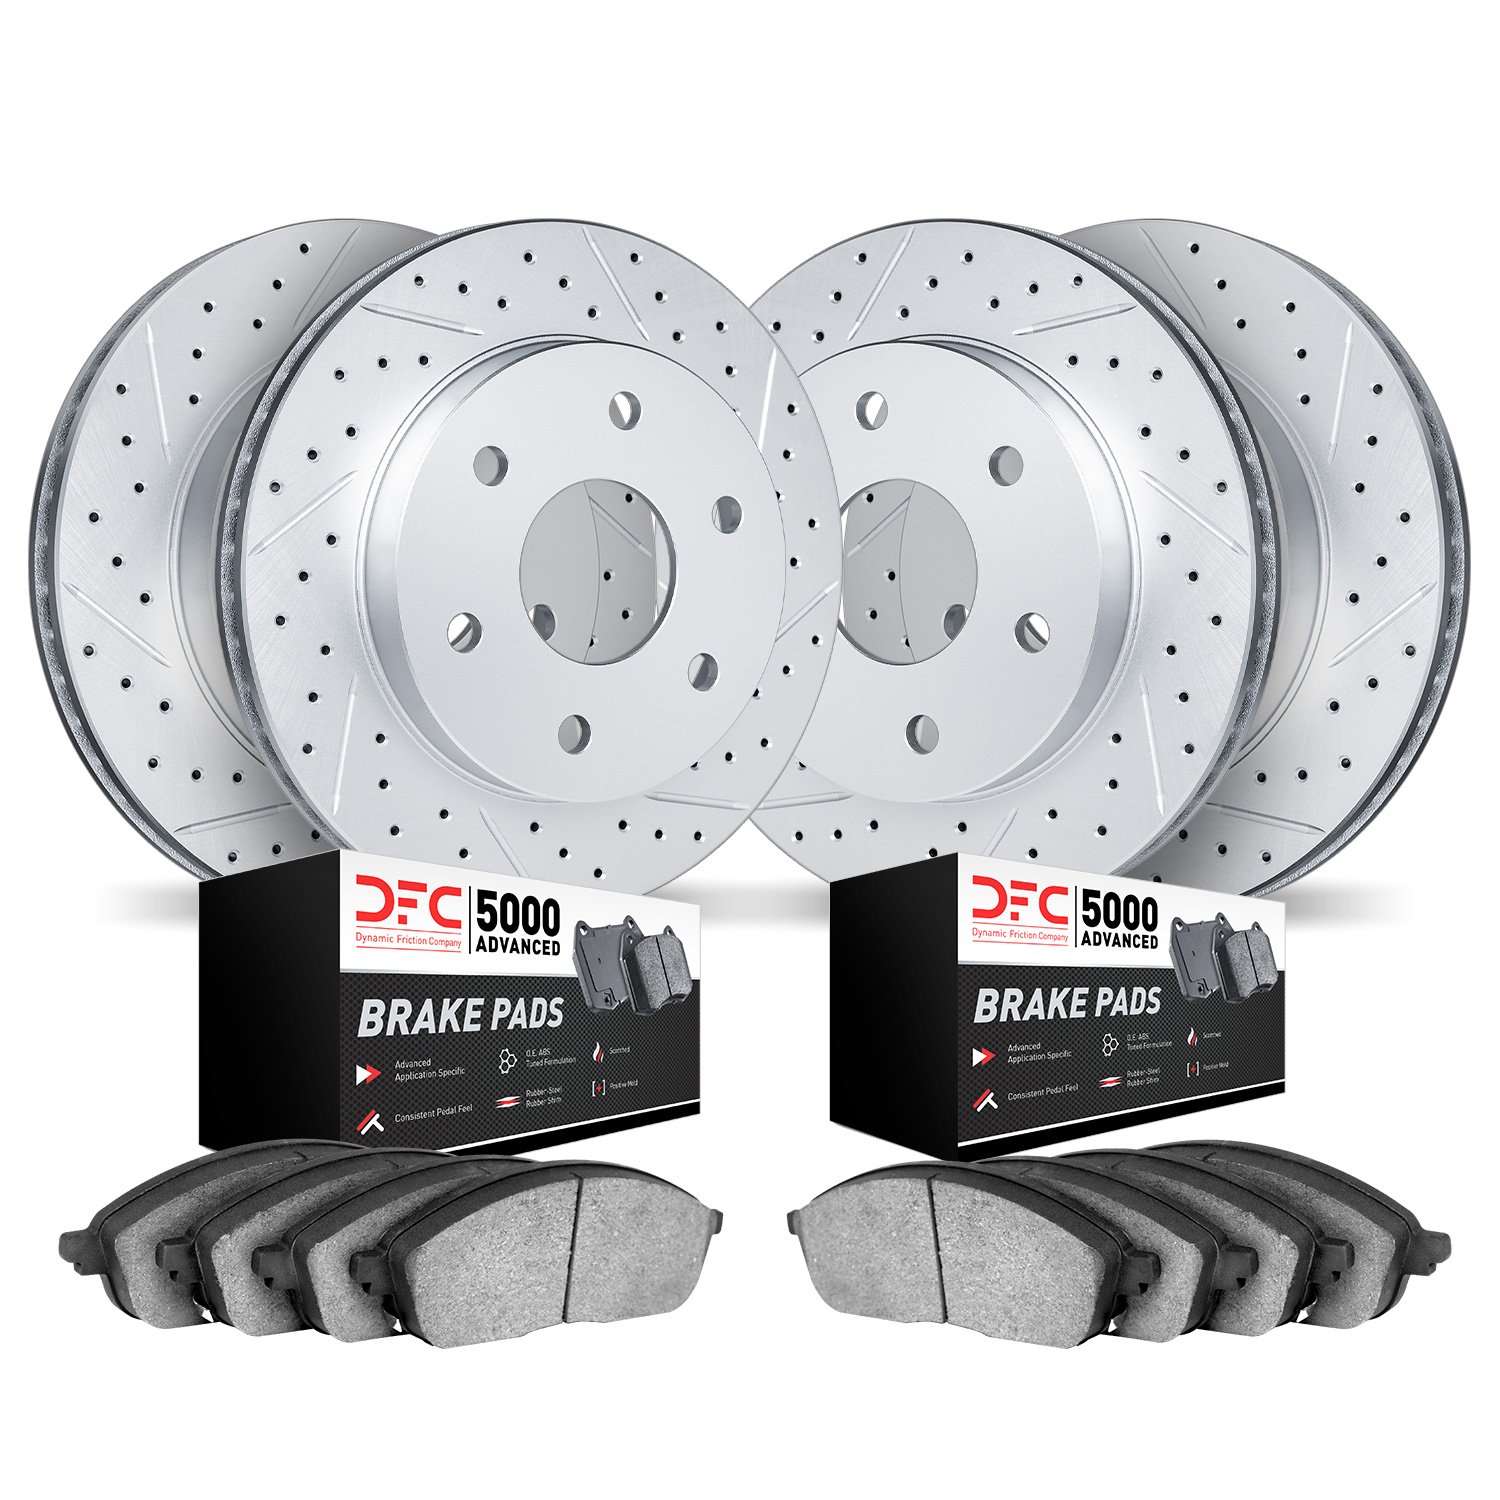 2504-48020 Geoperformance Drilled/Slotted Rotors w/5000 Advanced Brake Pads Kit, 2000-2006 GM, Position: Front and Rear